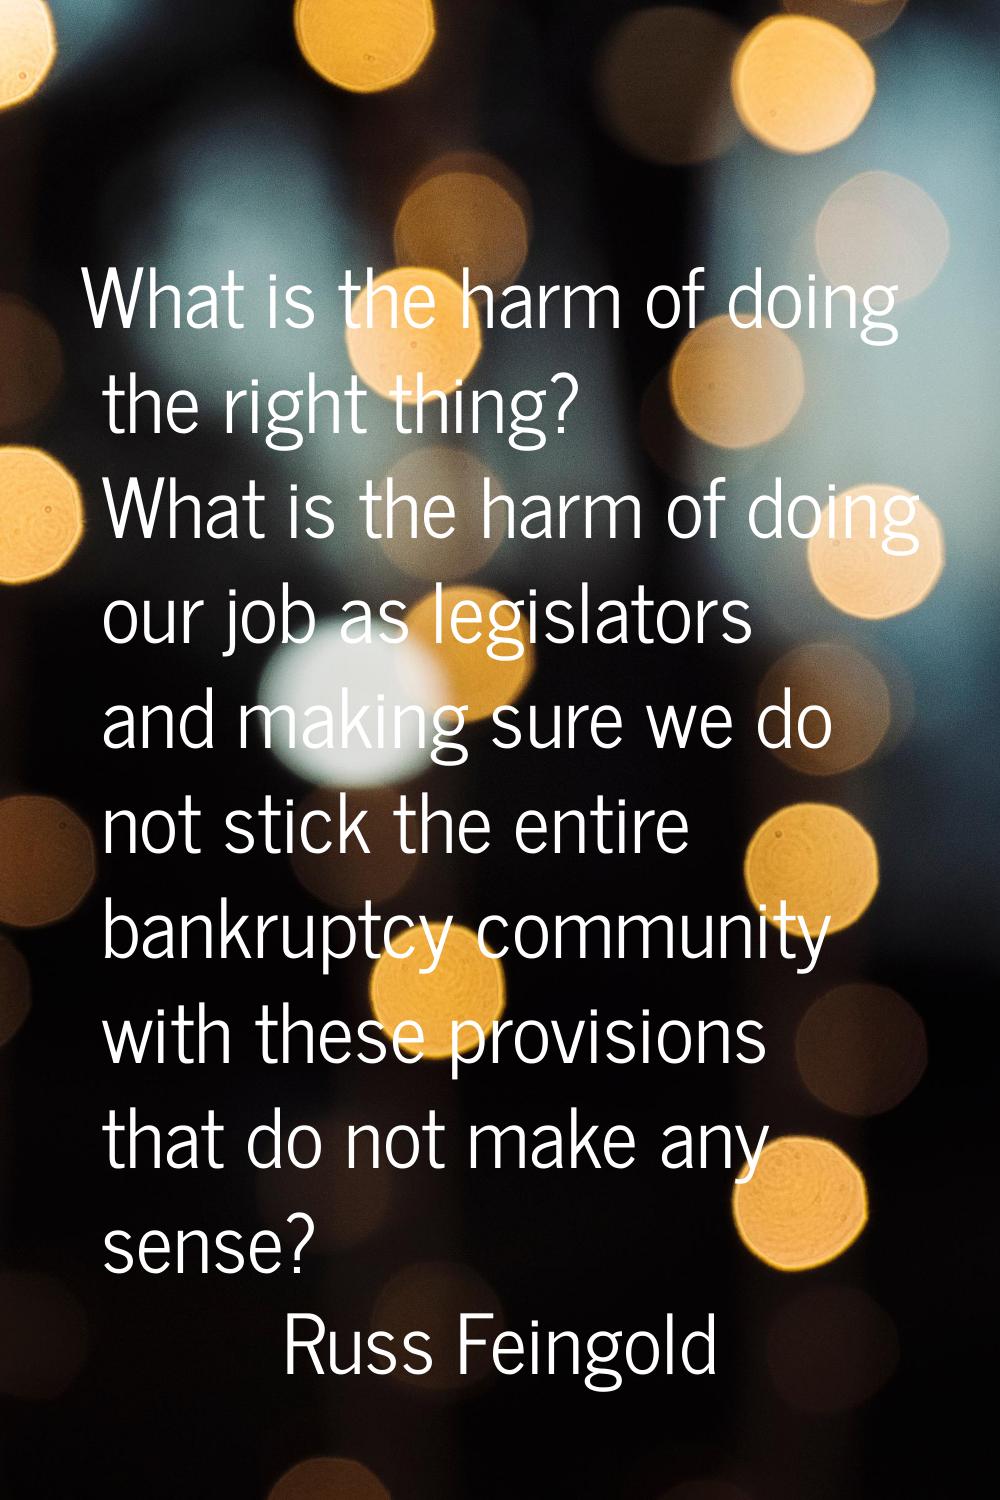 What is the harm of doing the right thing? What is the harm of doing our job as legislators and mak